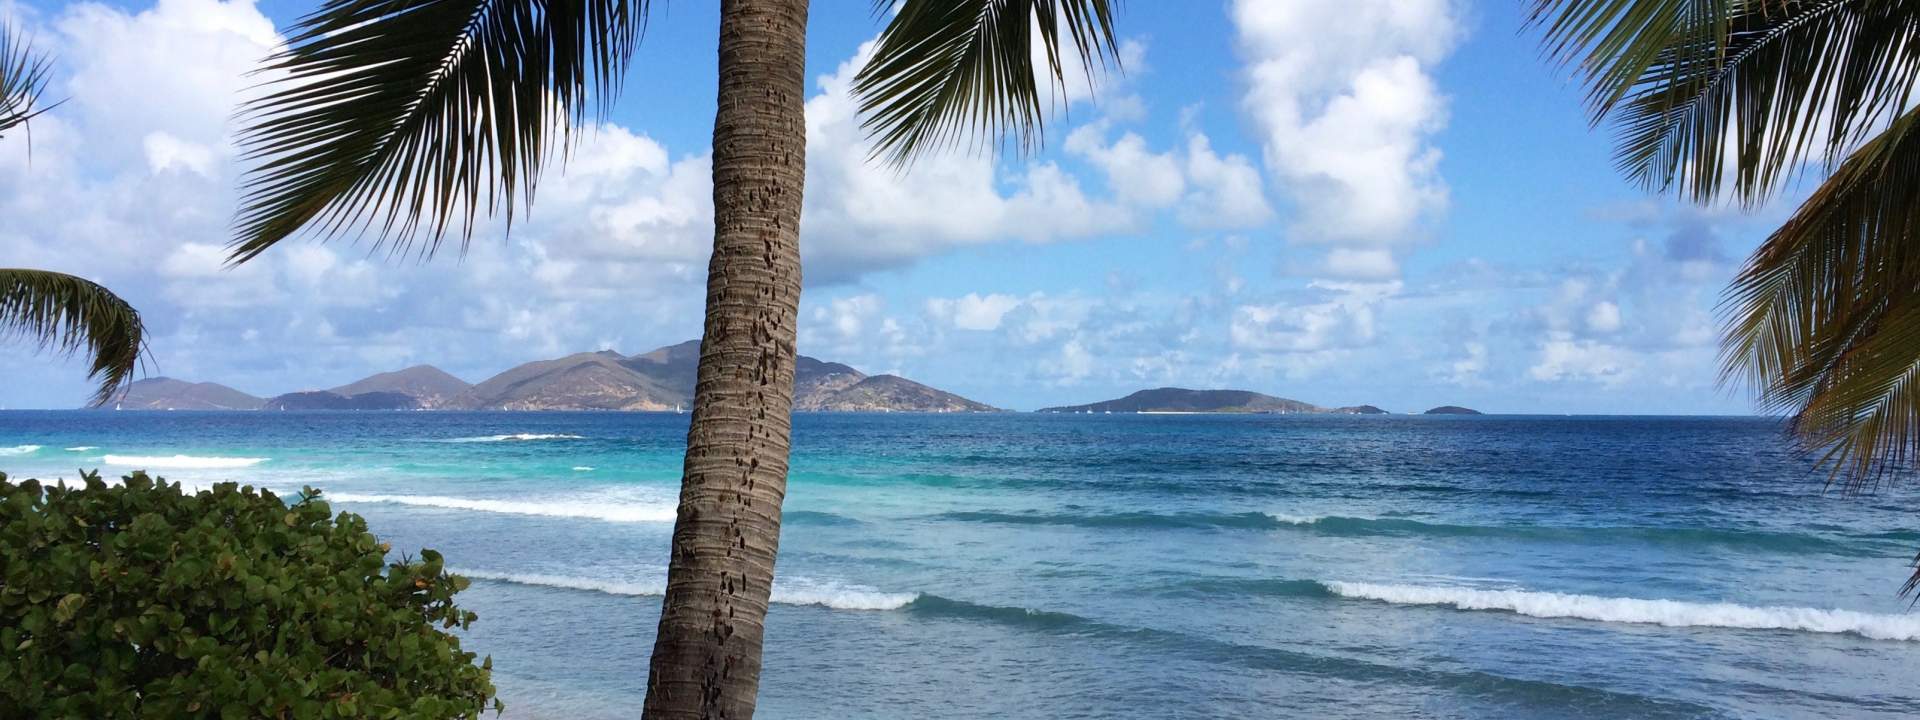 An adventure in the heart of the British Virgin Islands